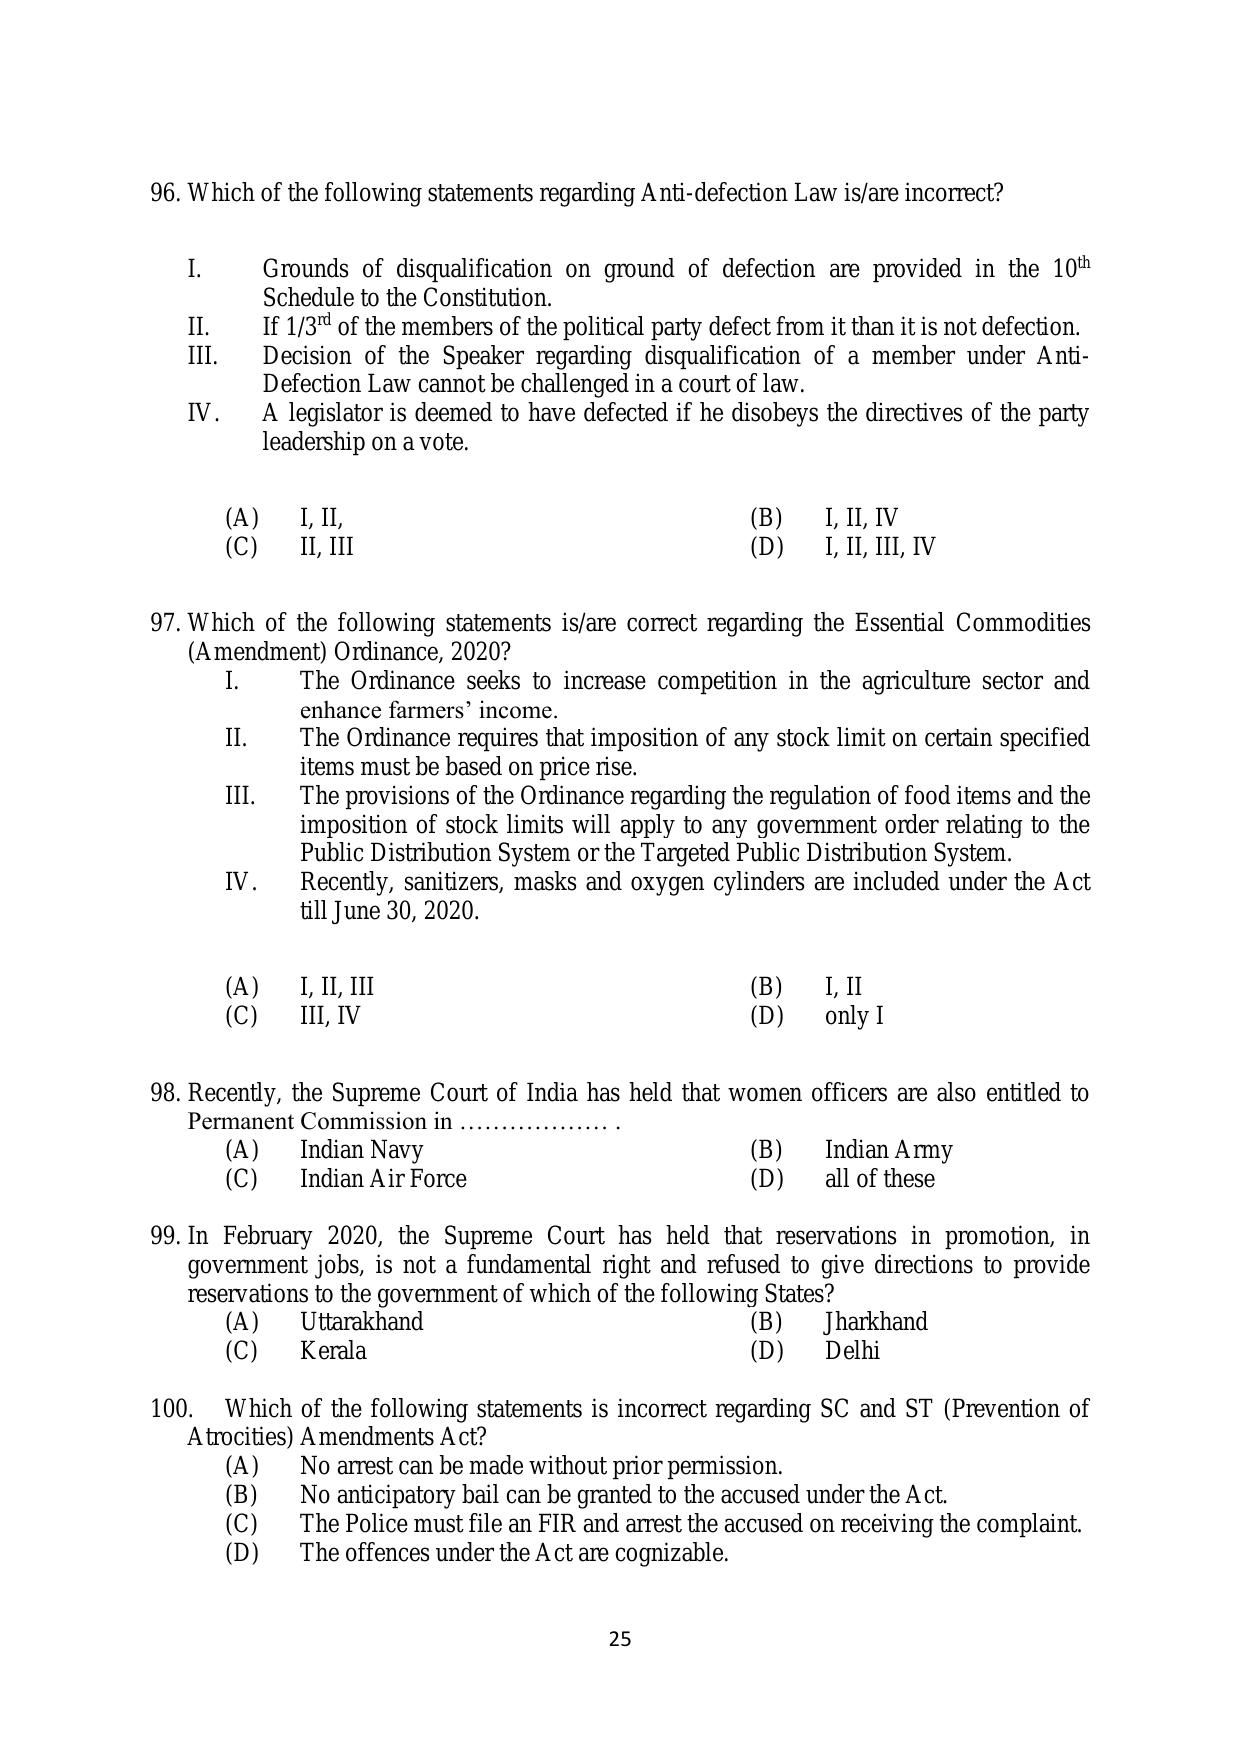 AILET 2020 Question Paper for BA LLB - Page 25